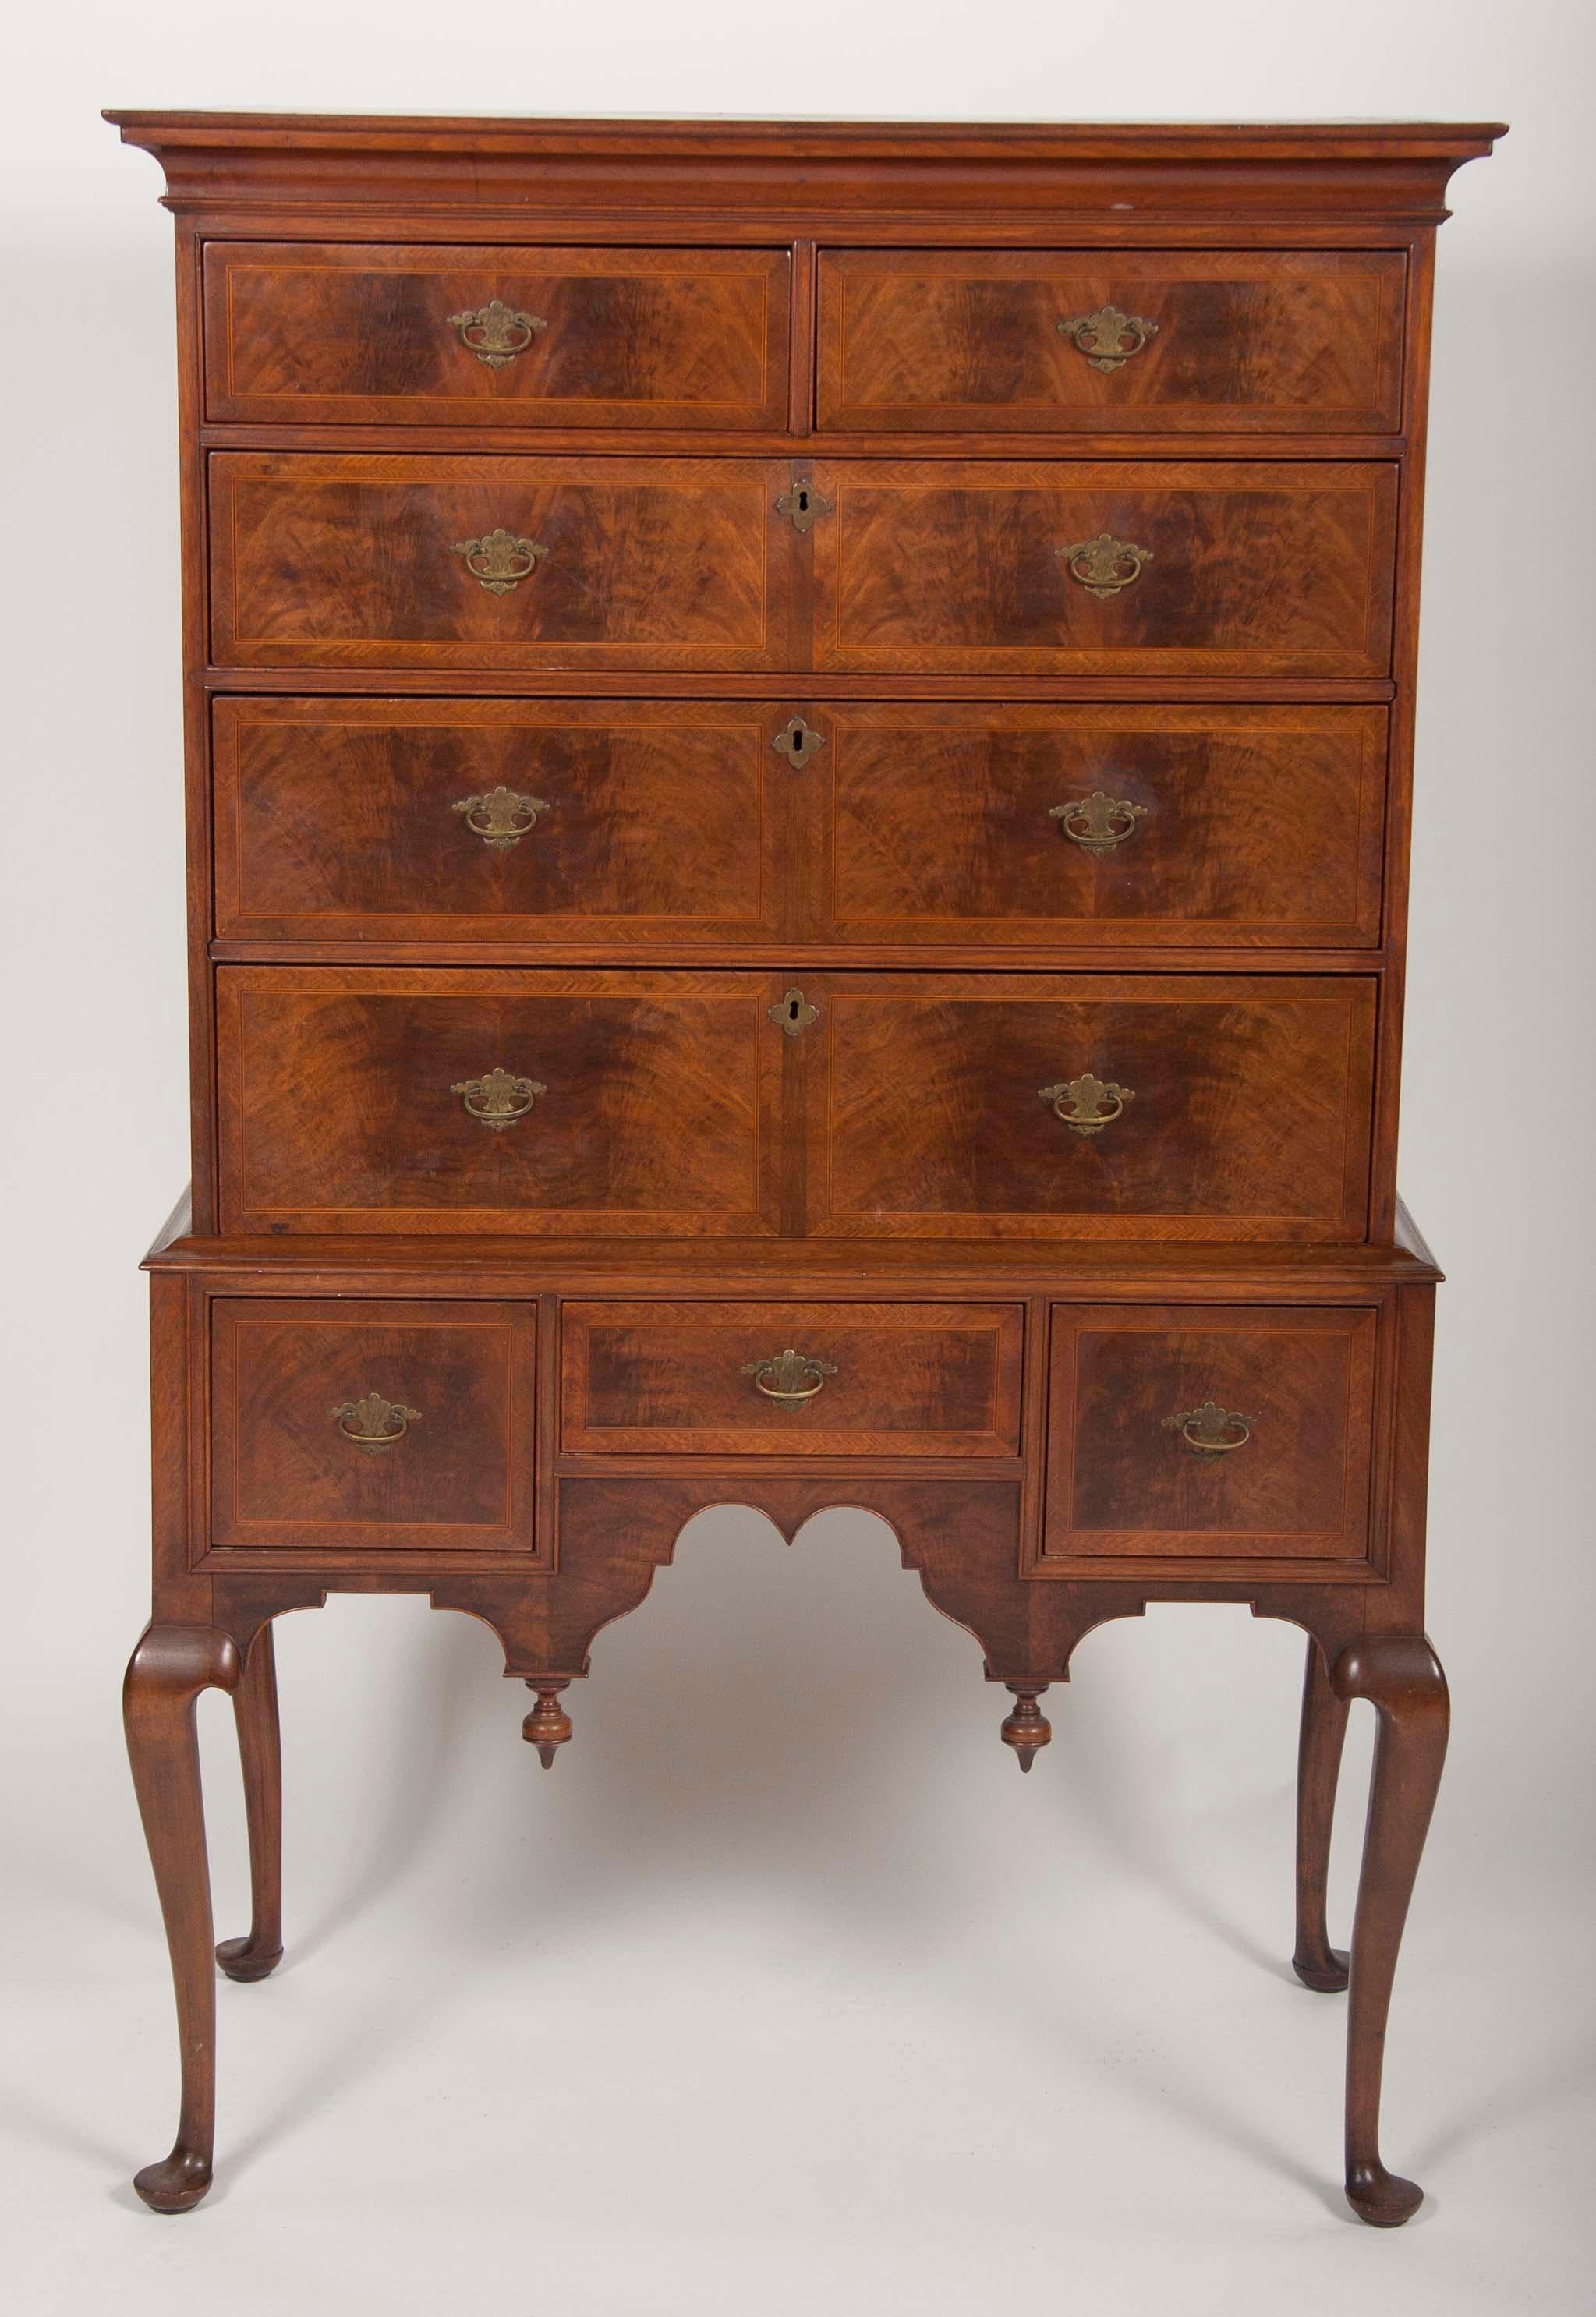 A desirable, diminutive New England two part flat top highboy, in rare transitional William & Mary to Queen Anne form. Top and bottom are original match. Walnut veneer over pine with maple legs. Original hardware. Refinished: small veneer chip above